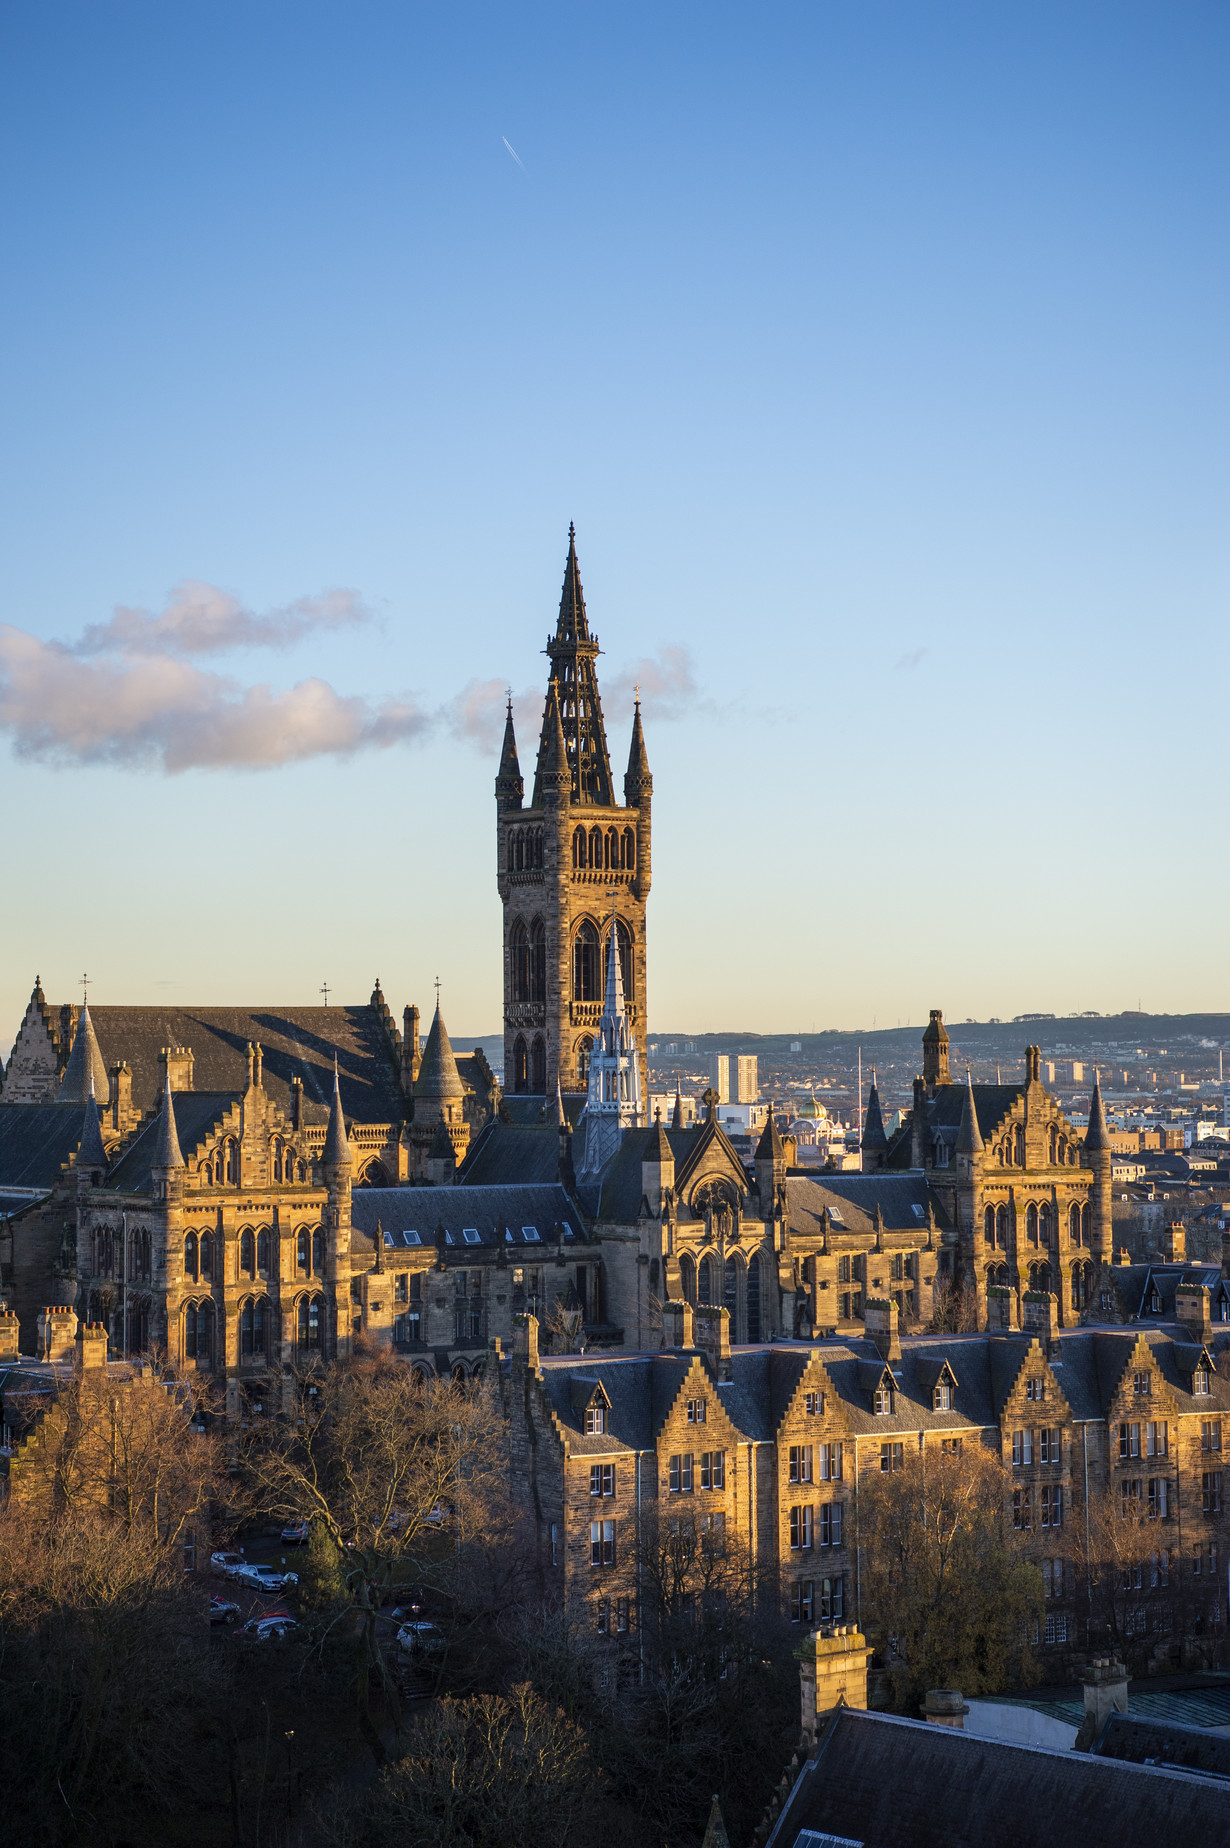 Main building of the University of Glasgow.